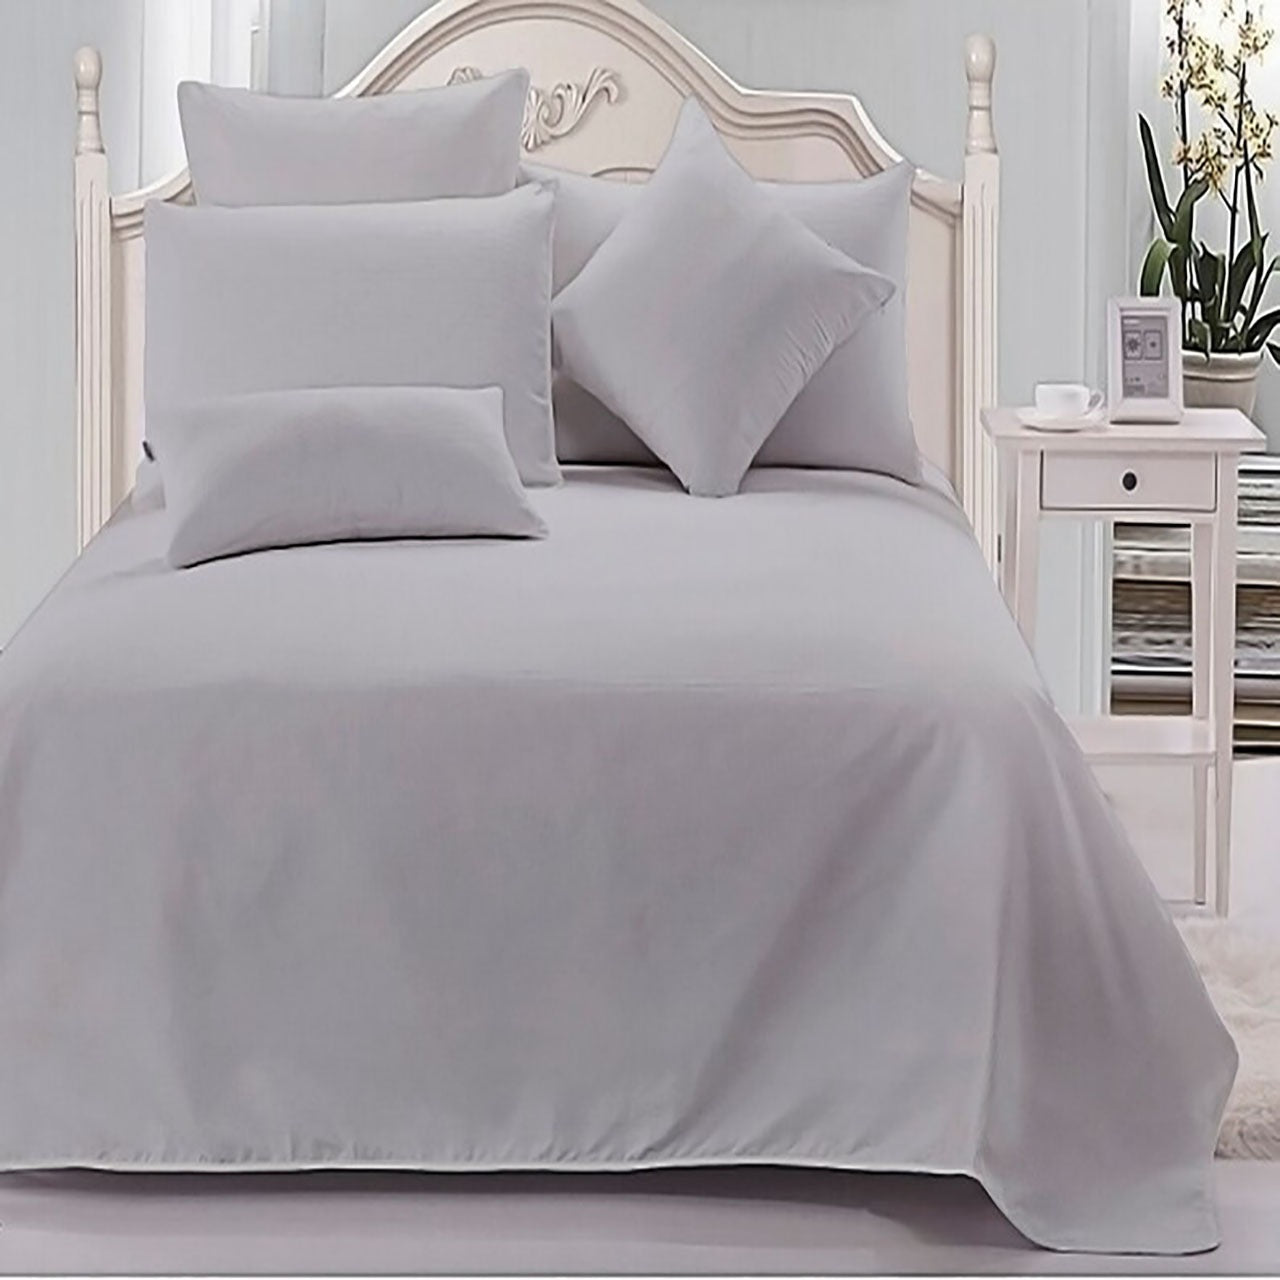 EUQIFAH Cotton Percale Bed Sheet Set -4pc- Cool, Breathable, Durable - Fade & Shrink Resistant - Luxurious Comfort Bedding T 800